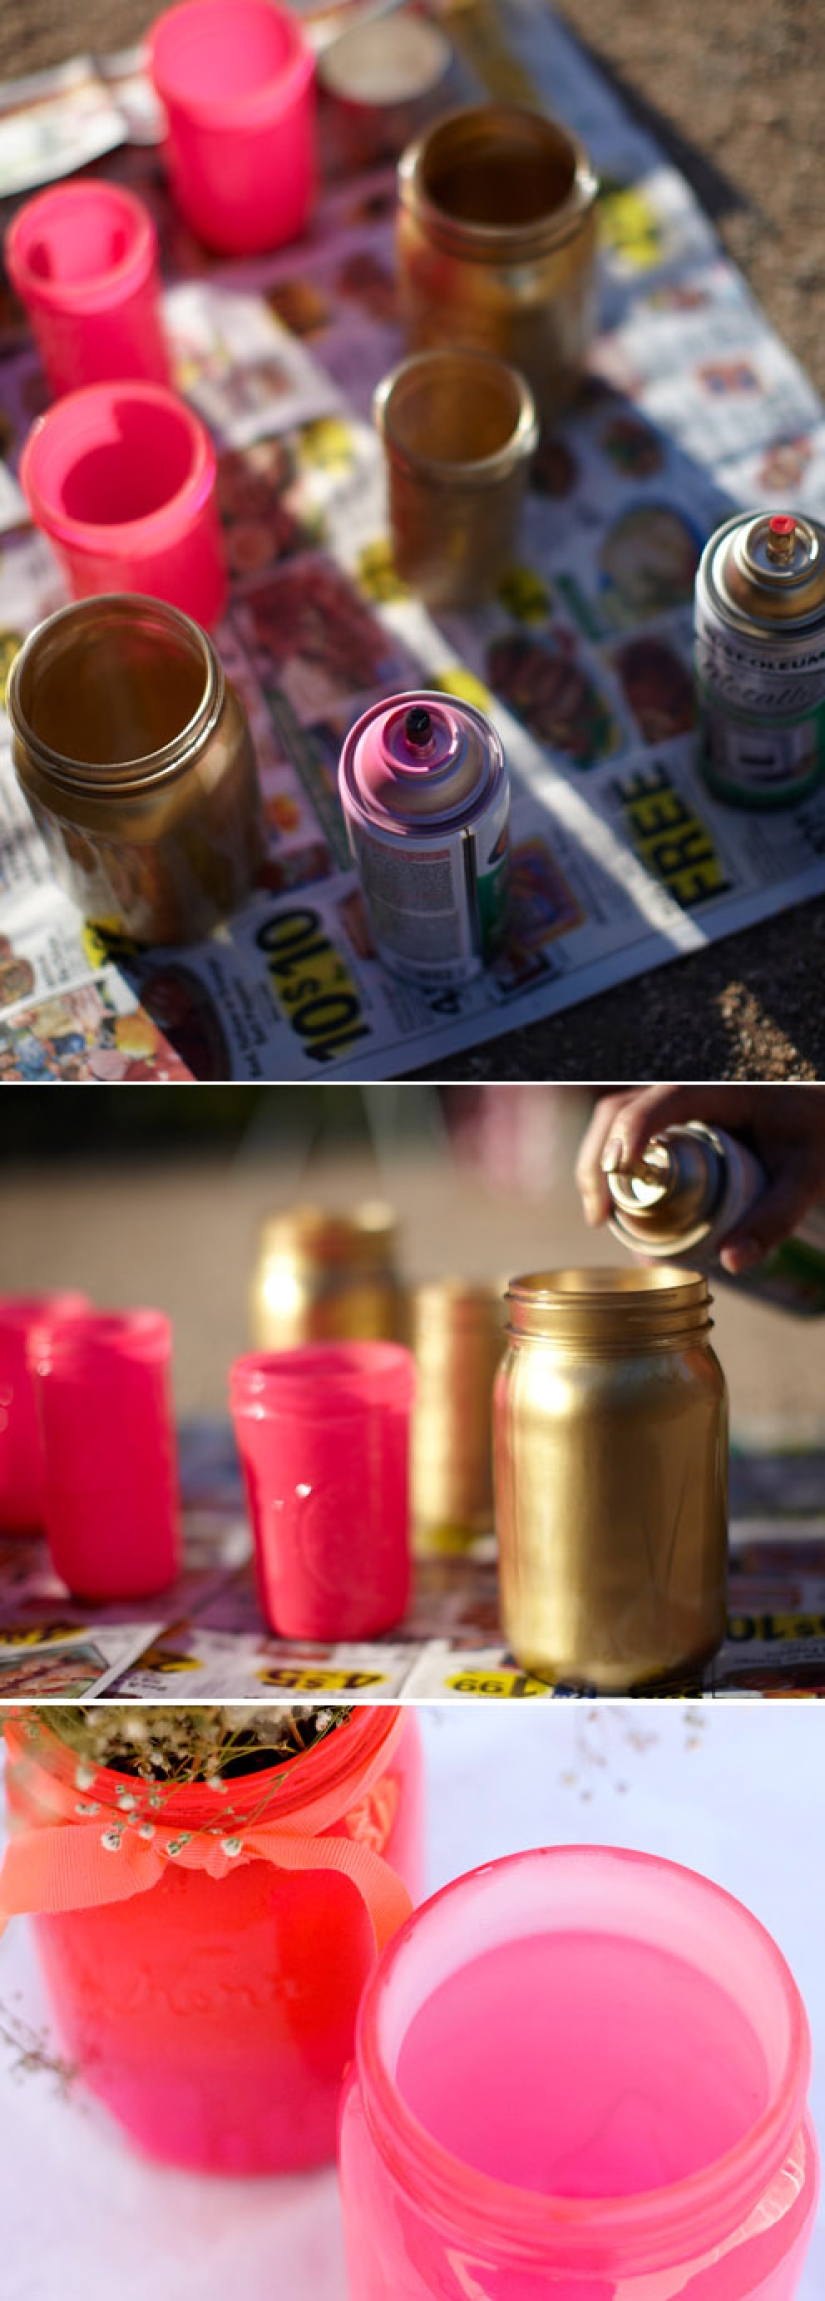 40+ ways to turn empty cans into something useful